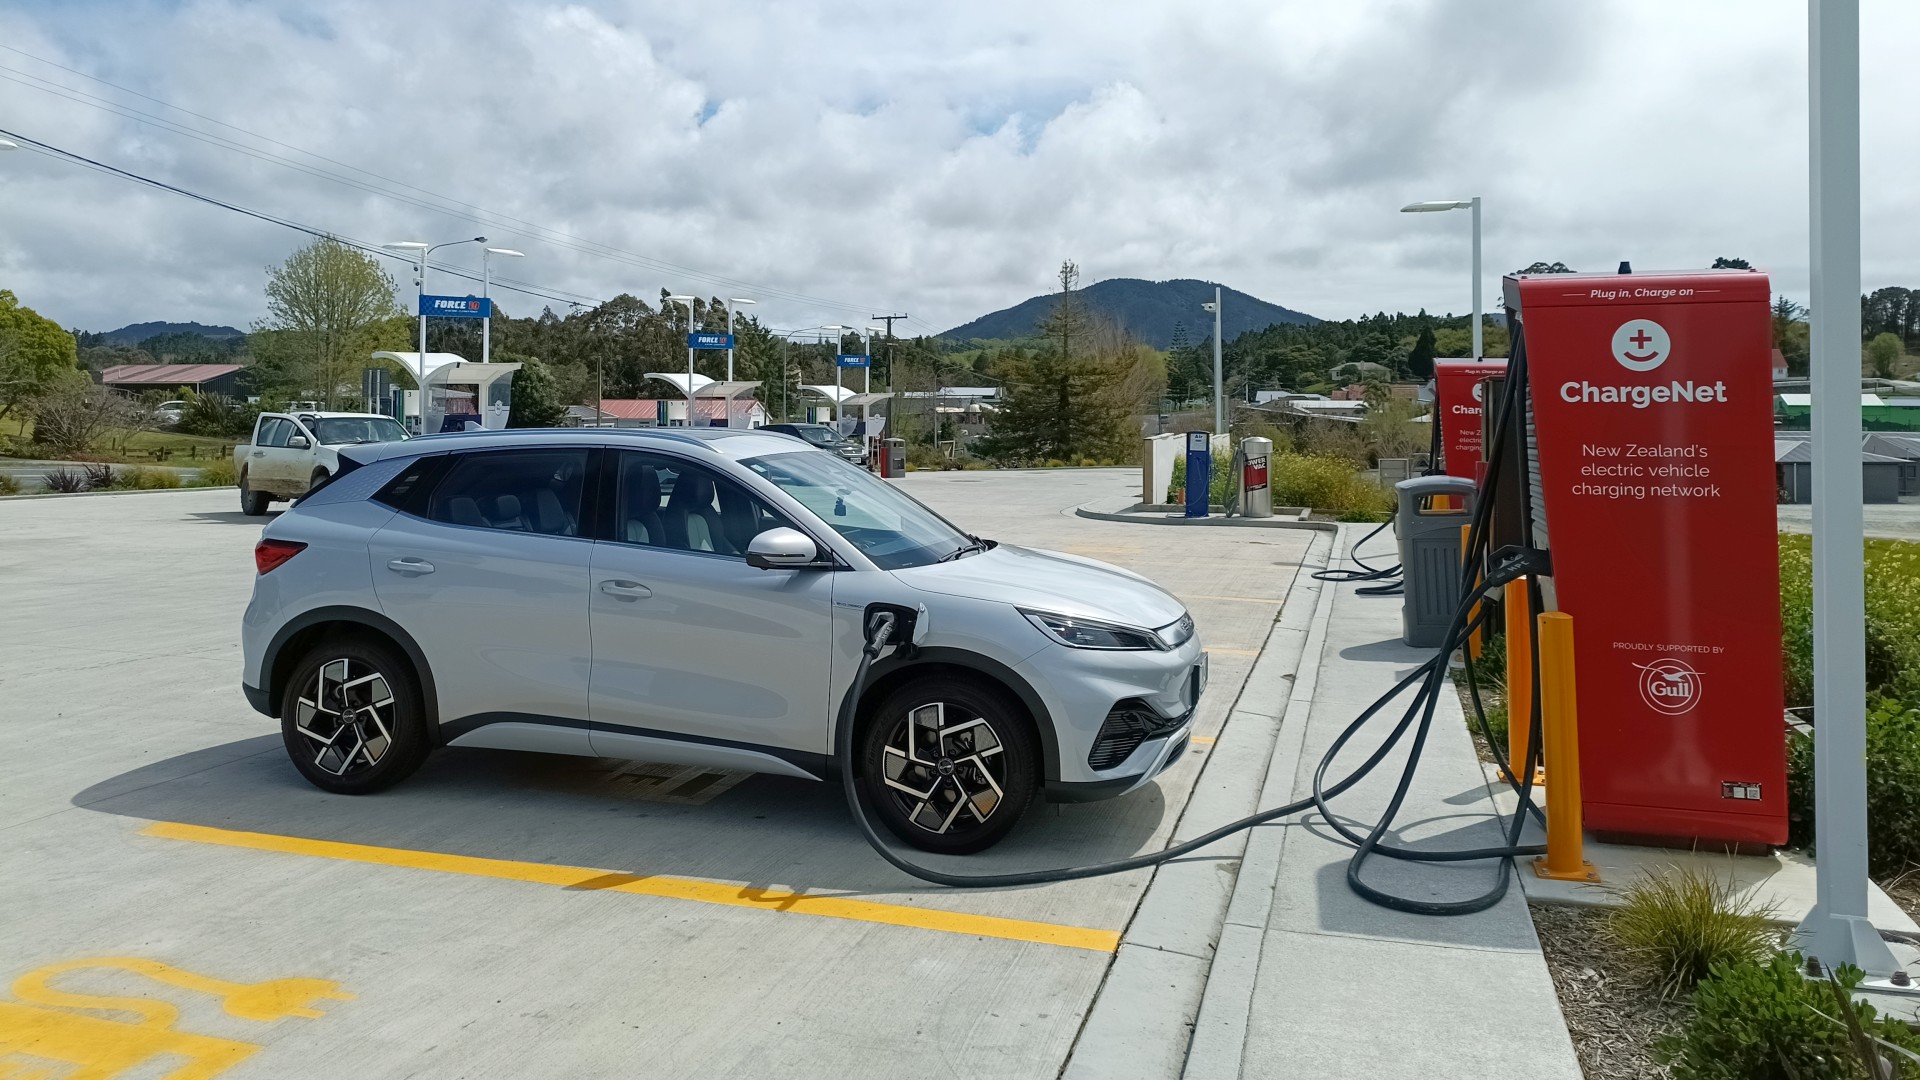 A BYD Atto 3 electric car stopped at a charging point in Kaiwaka, plugged in and recharging